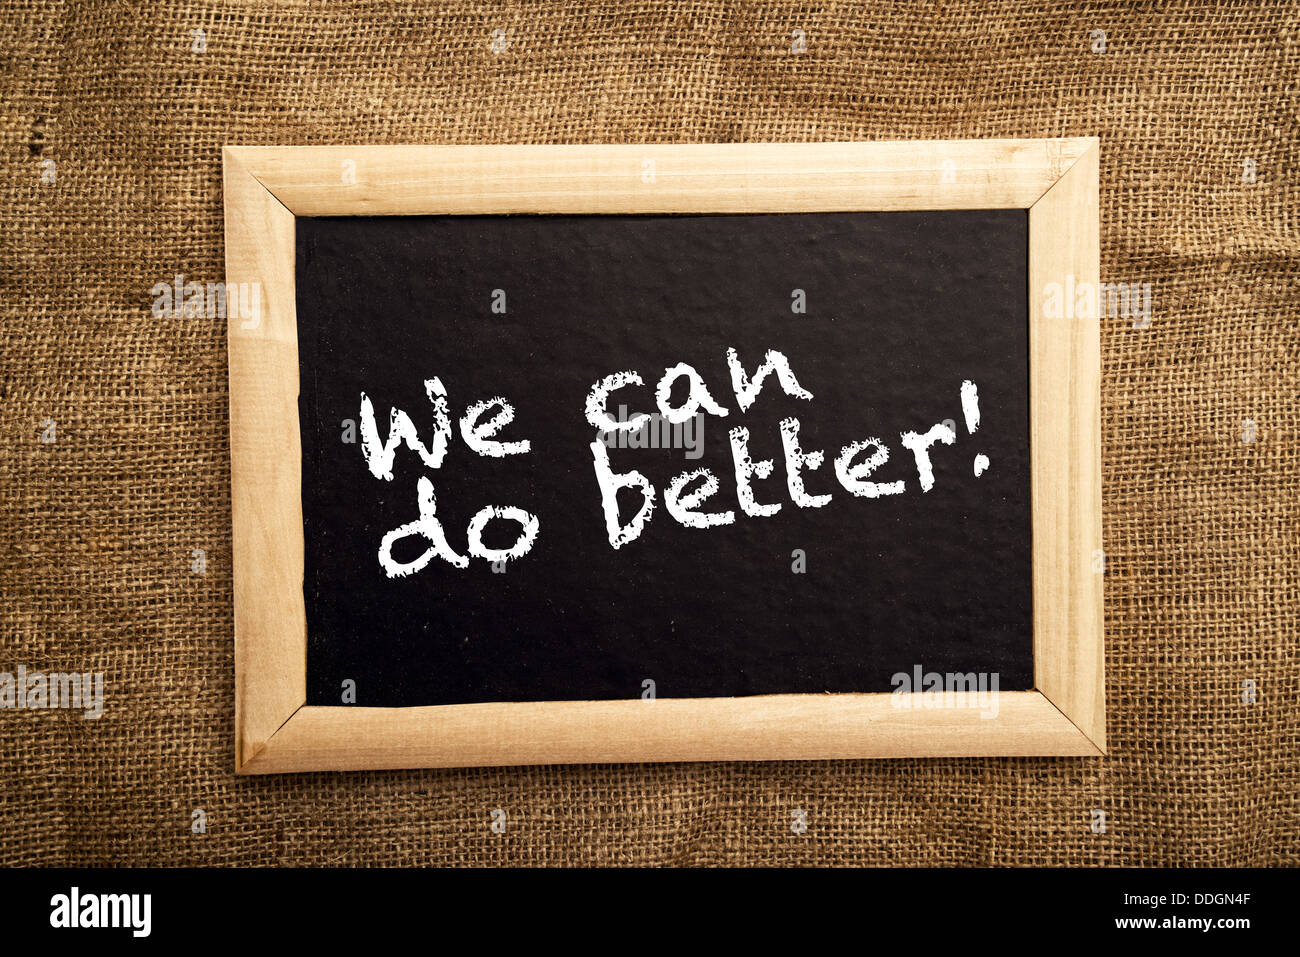 We can do better, motivational message on blackboard. Stock Photo